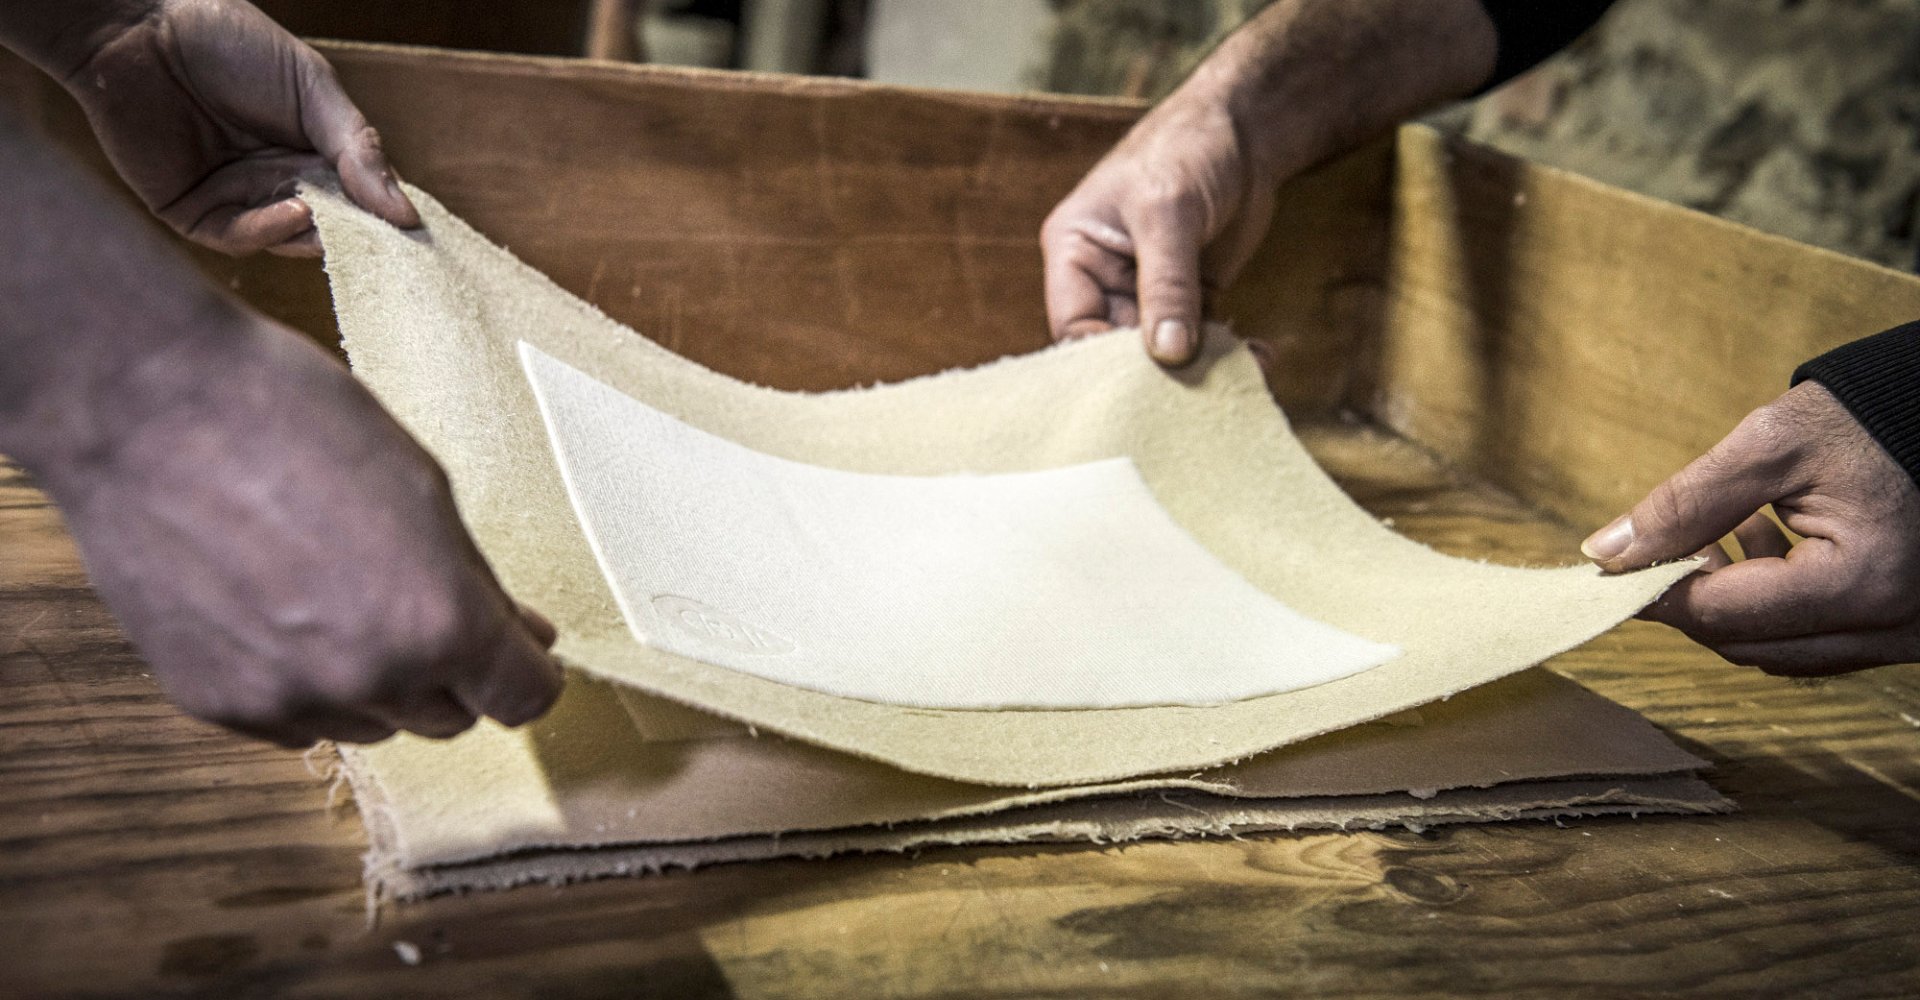 The production of the handmade paper